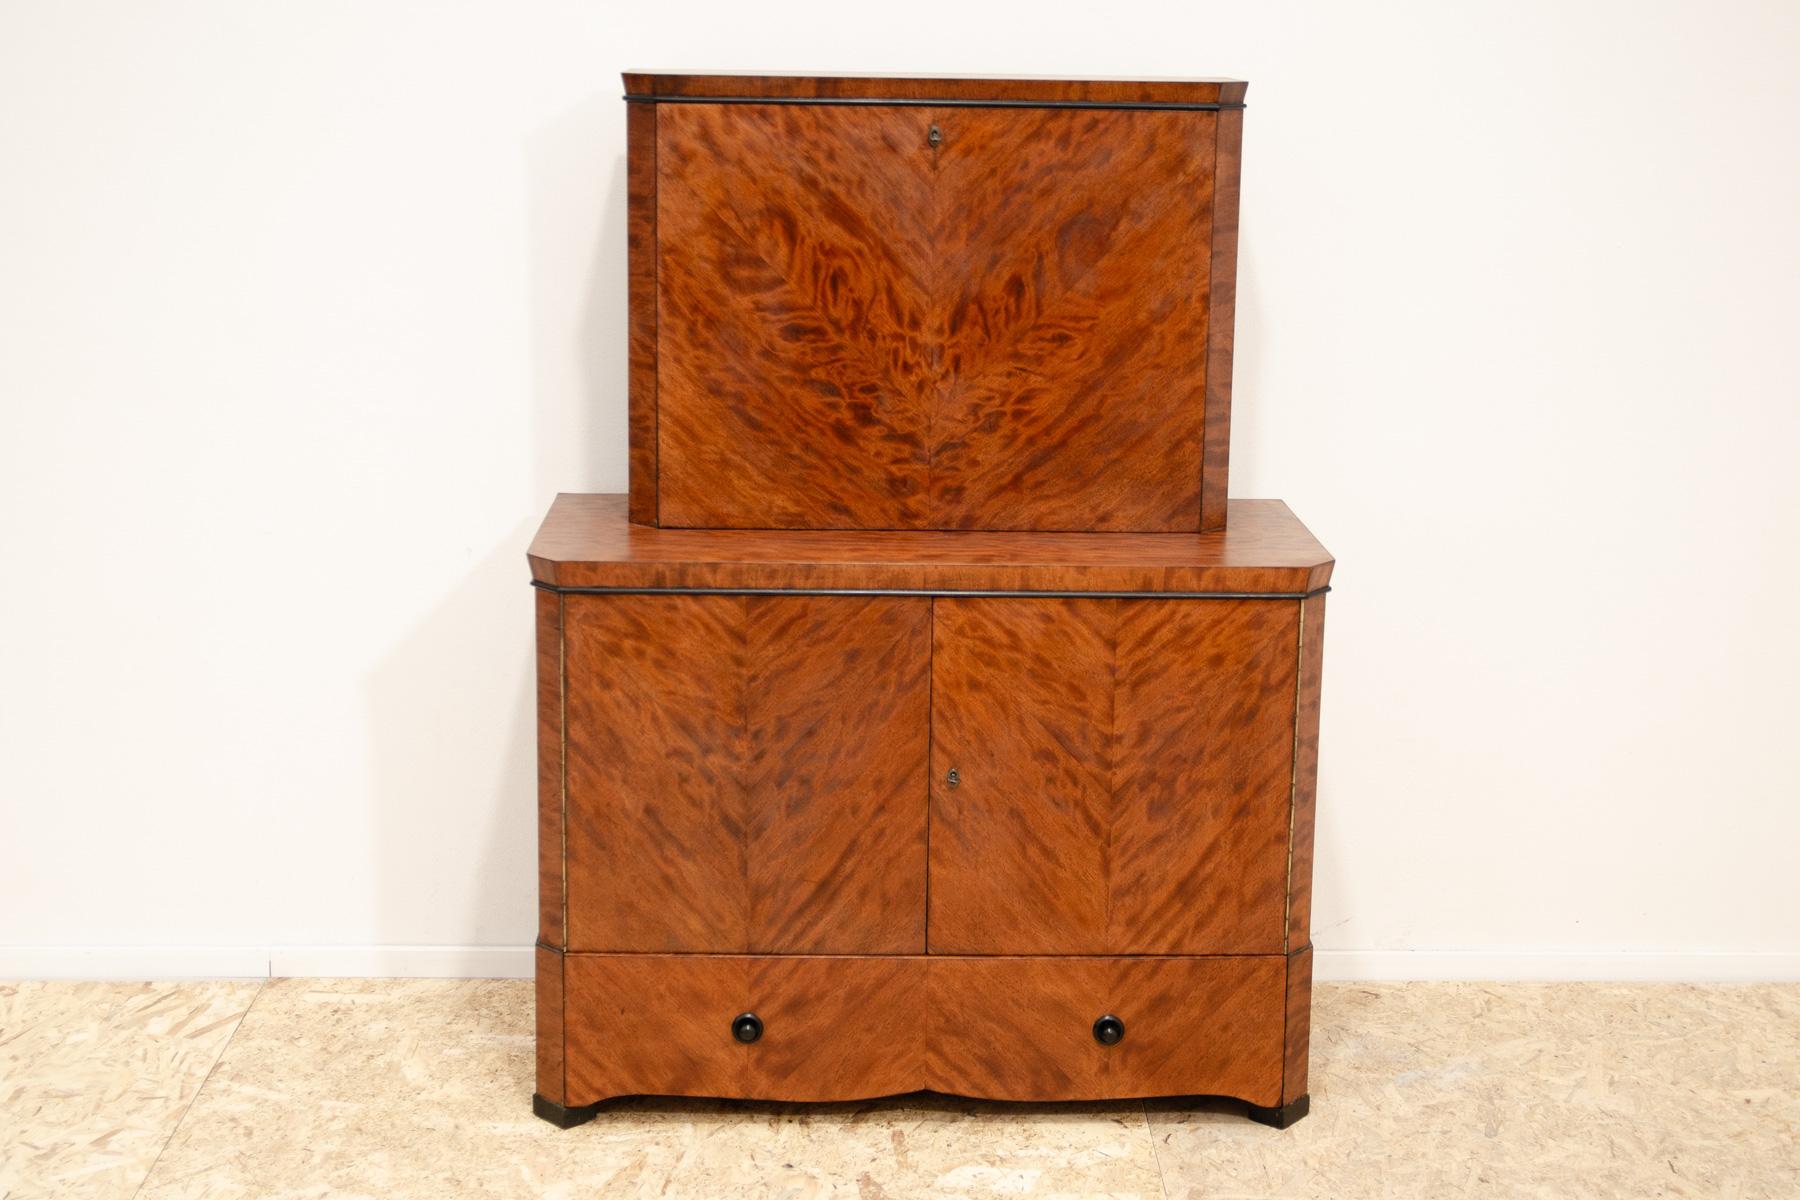 This ART DECO style piece was made in the former Czechoslovakia in the 1930´s.

It is made of solid wood with walnut veneer.  You can use the cabinet as a bar or as a sideboard.

The furniture is in excellent condition, it has been completely